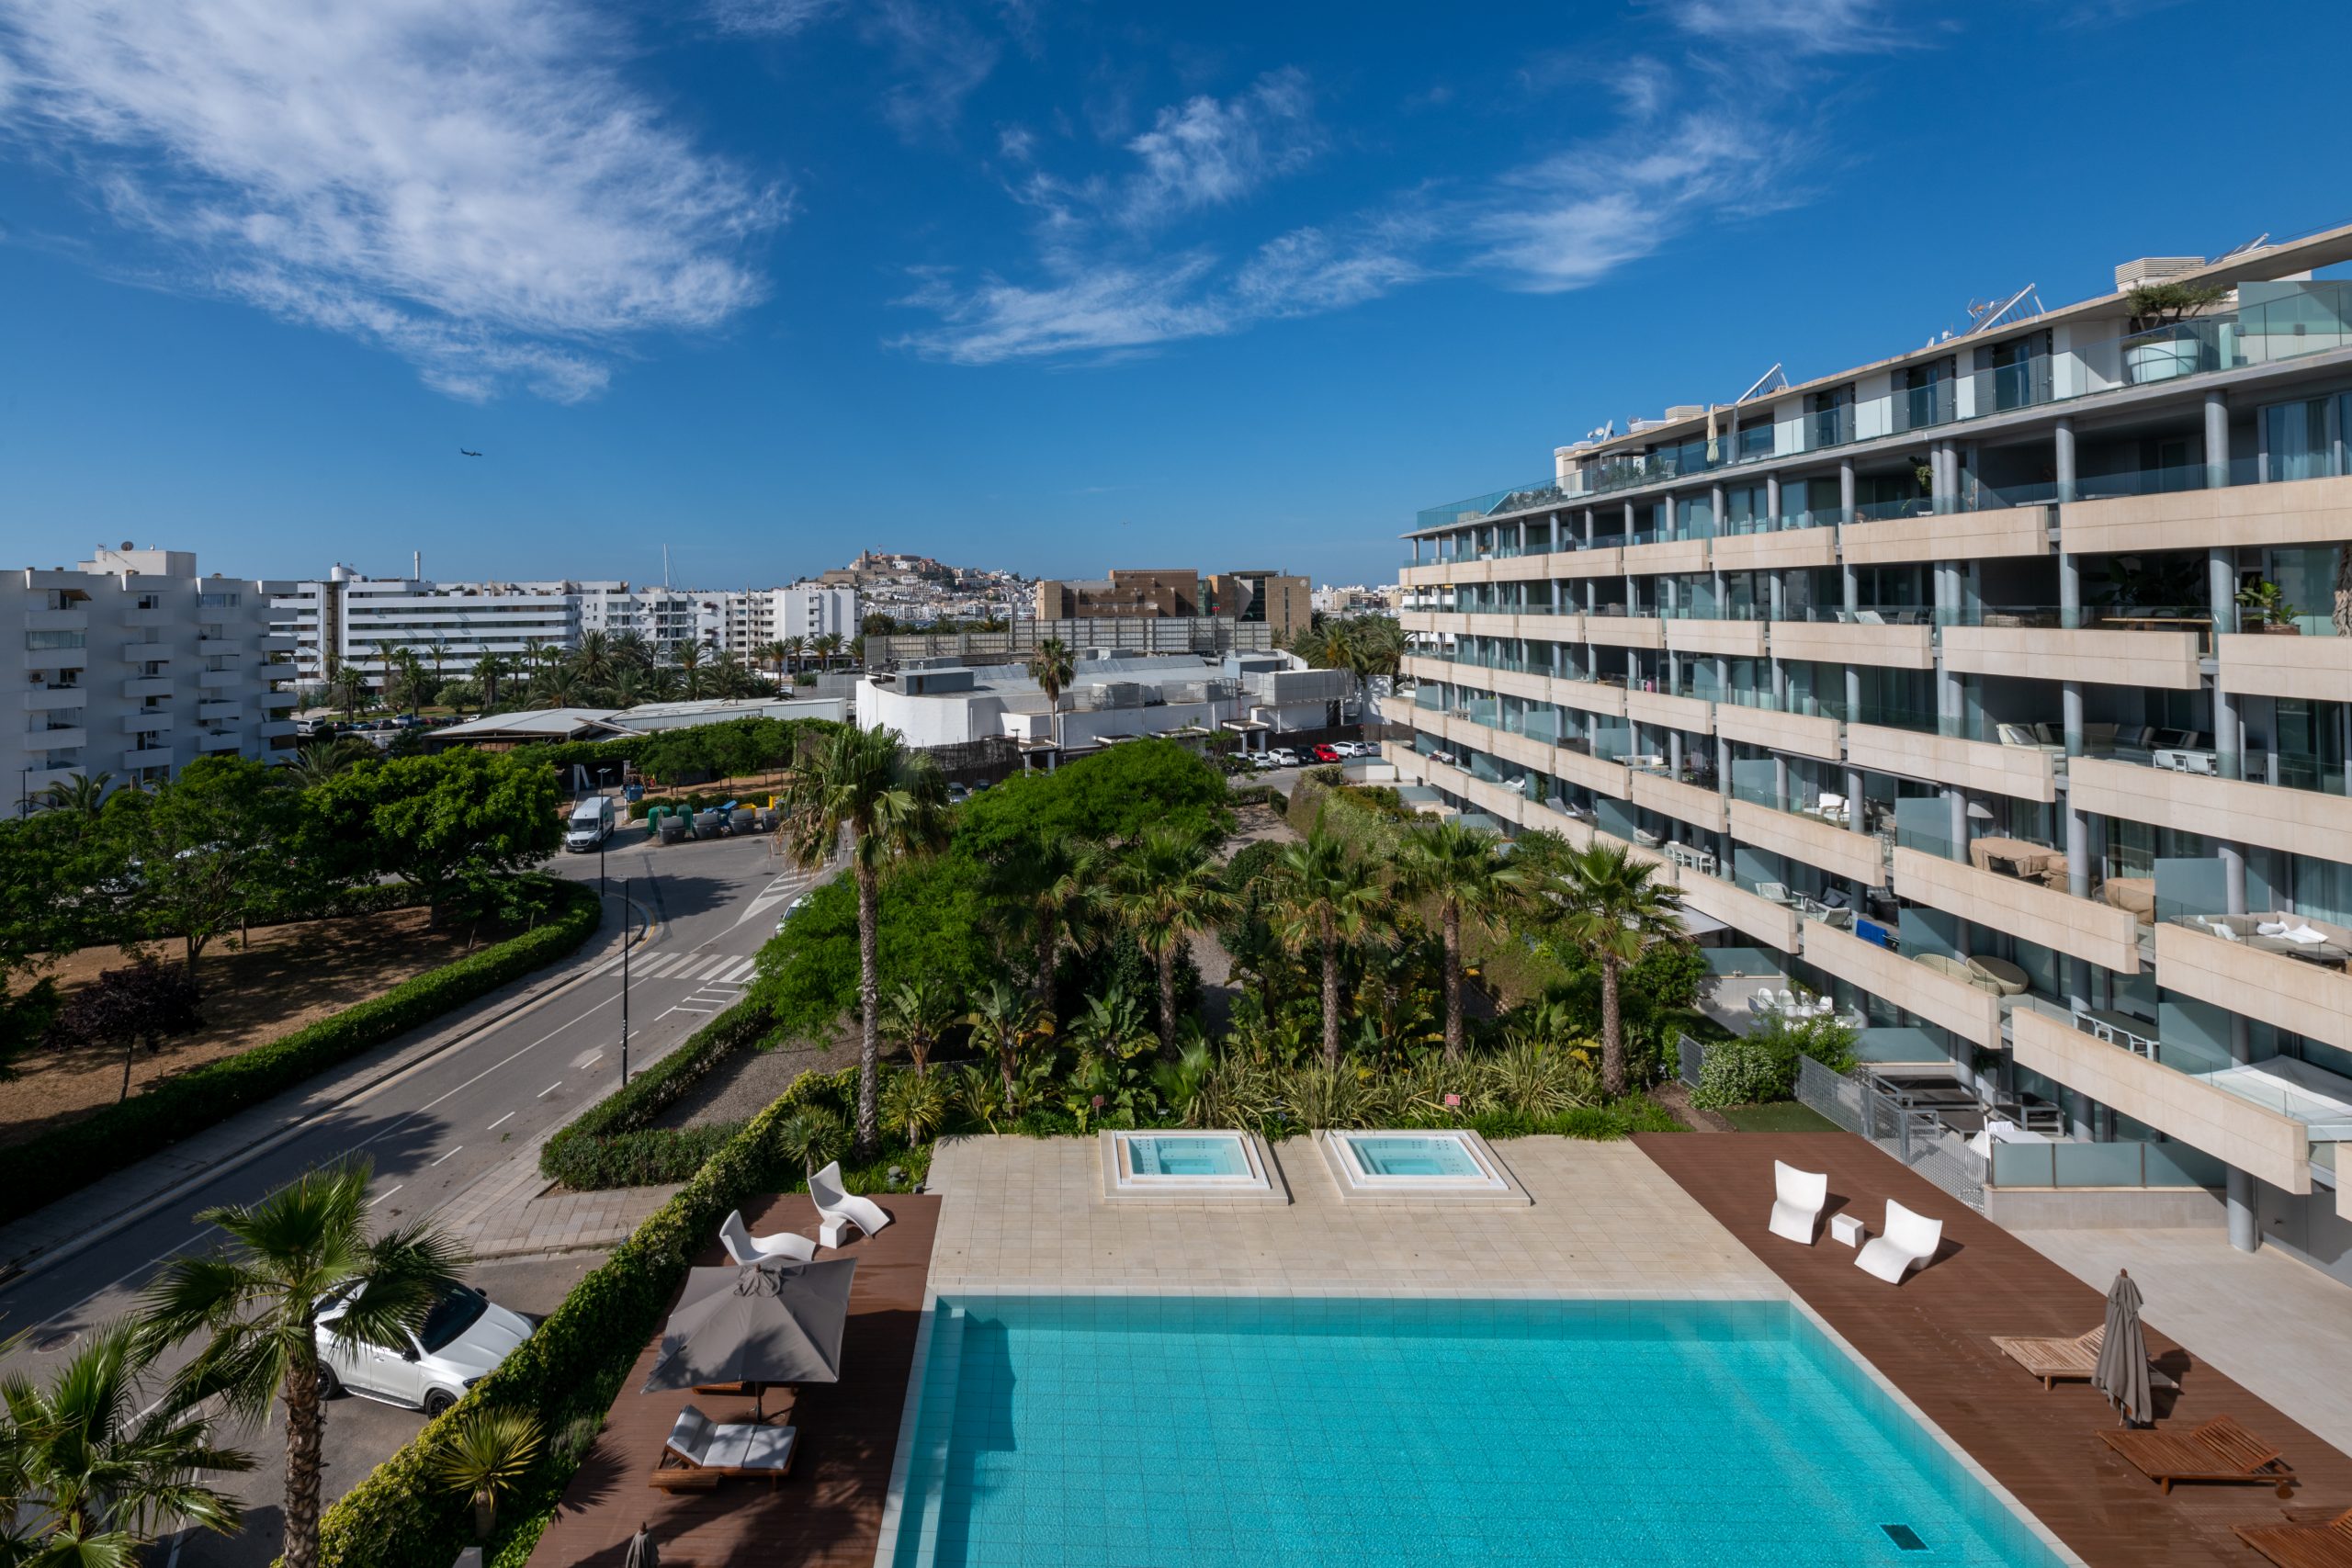 Apartment with 3 bedrooms for sale in the White Angel, Ibiza